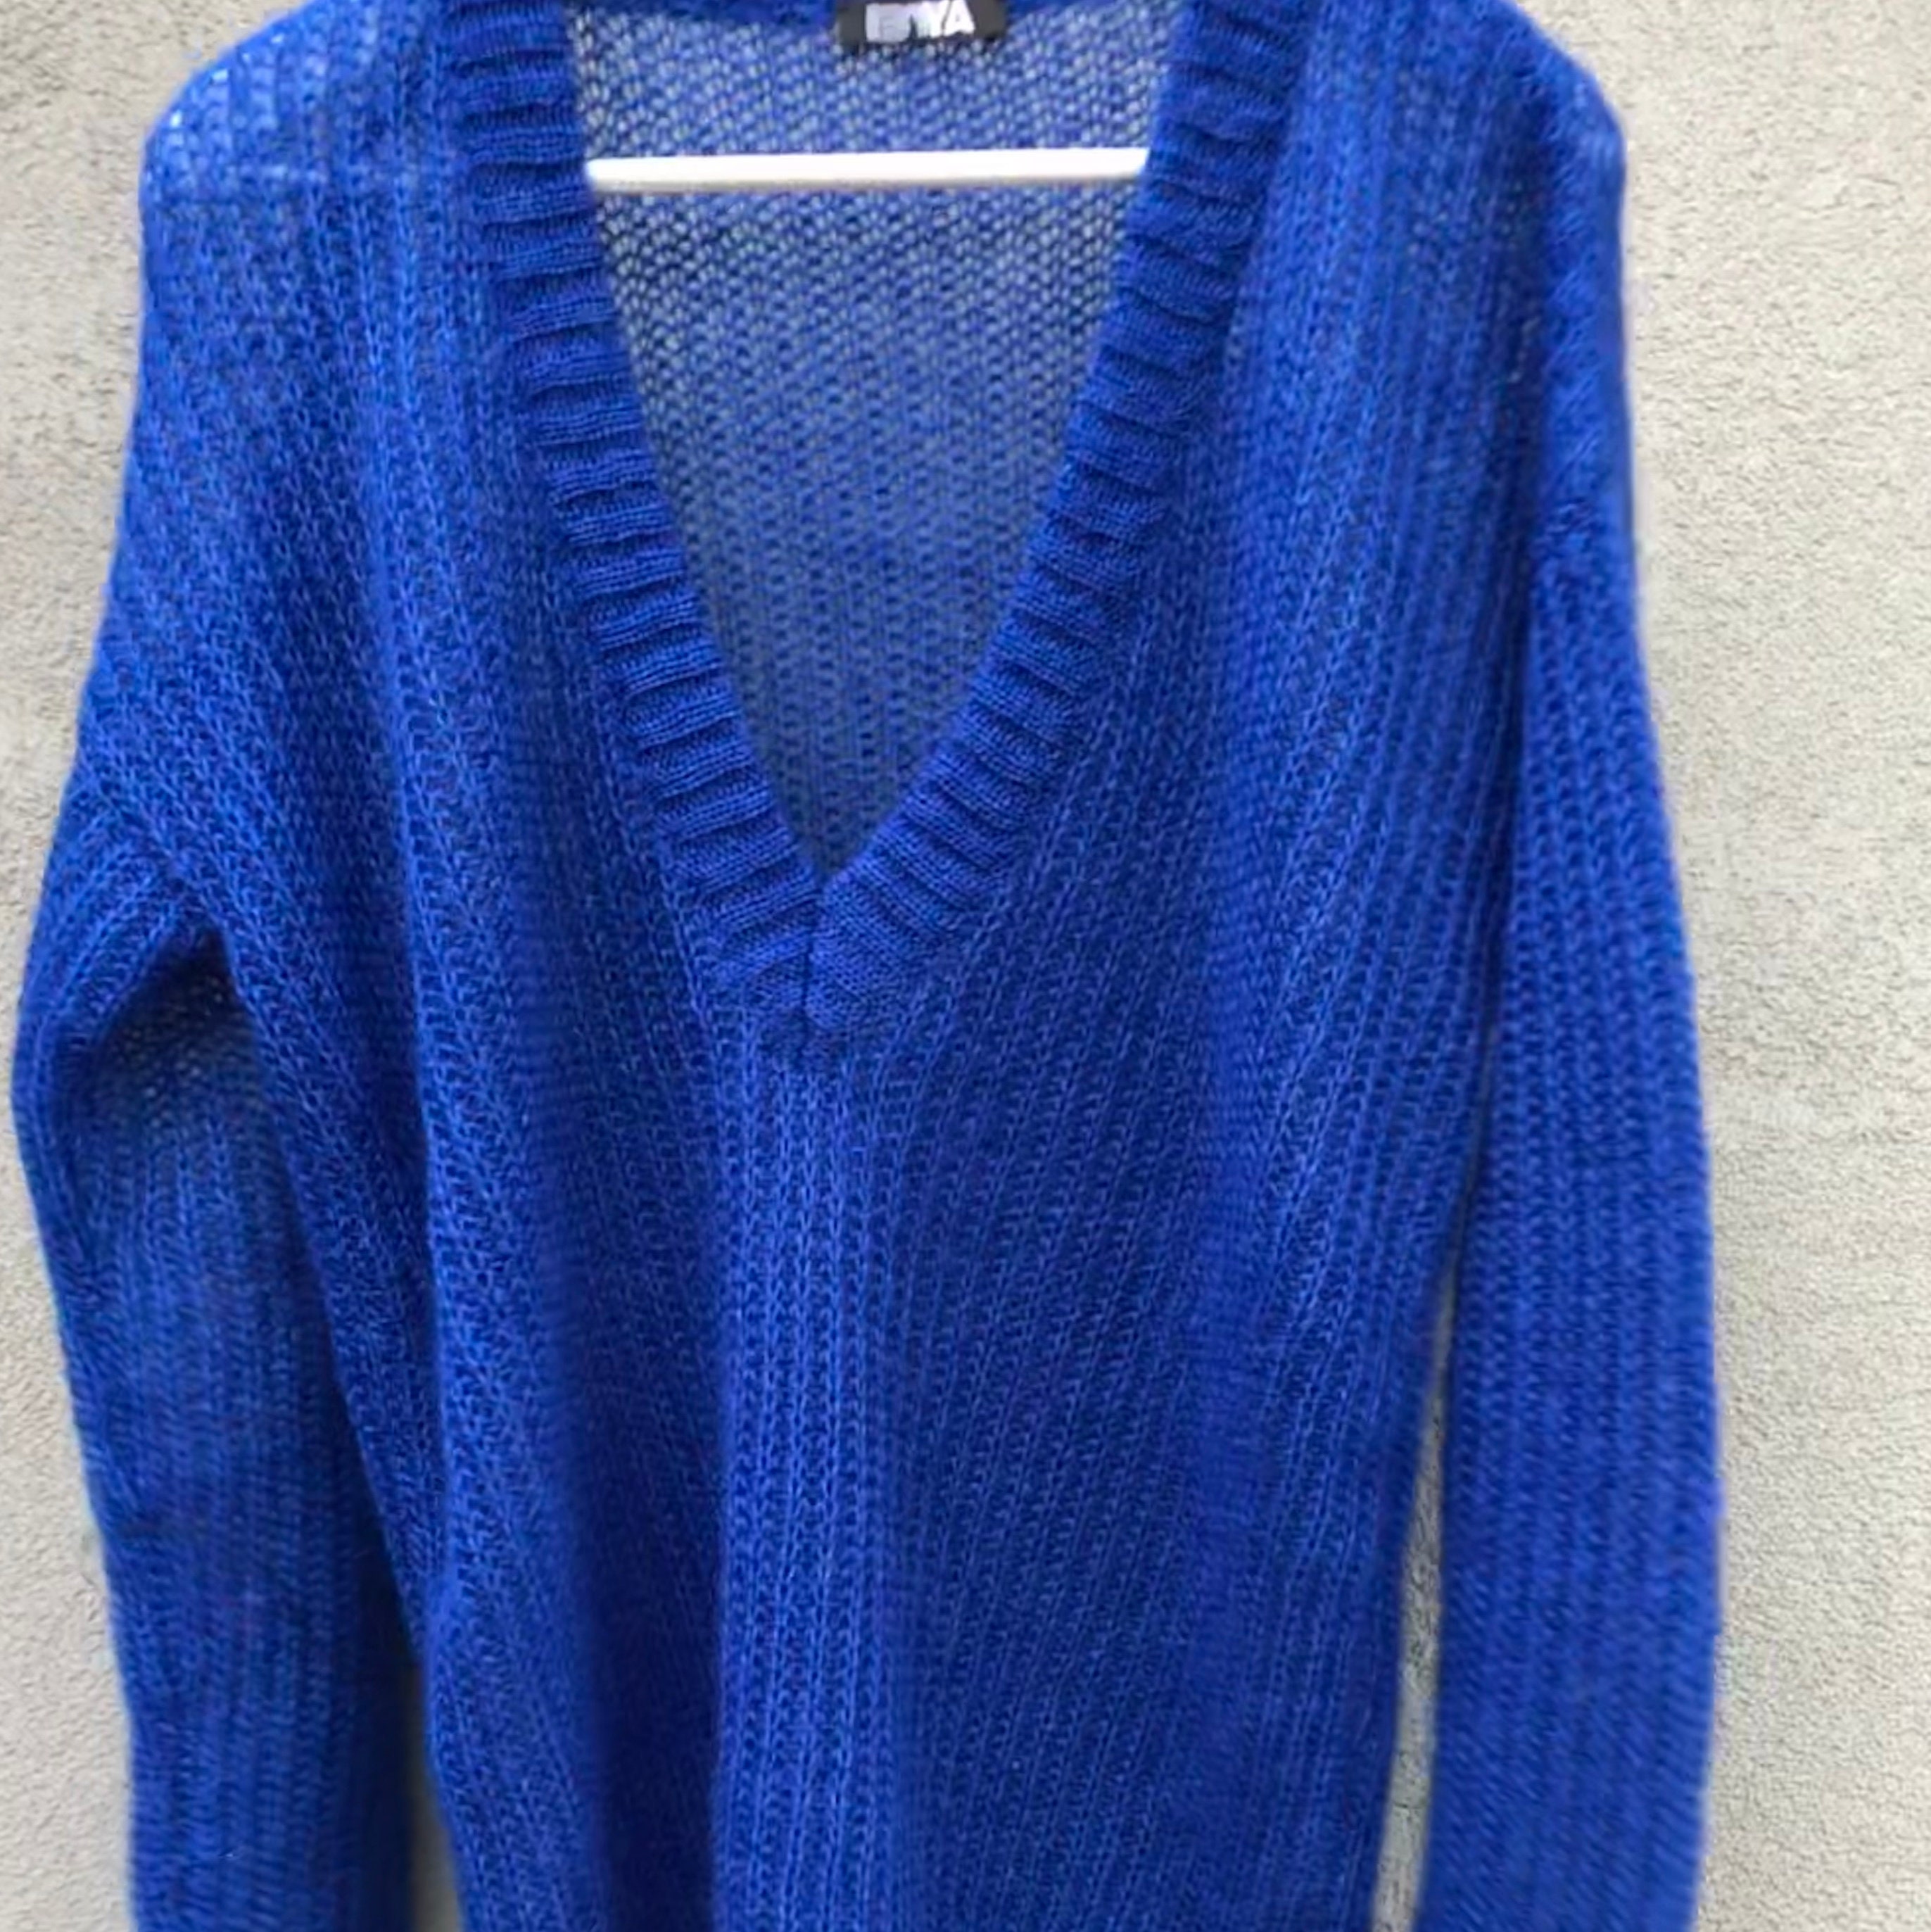 Loose Knit Sweater Electric Blue Mohair Sweater Light V Neck | Etsy